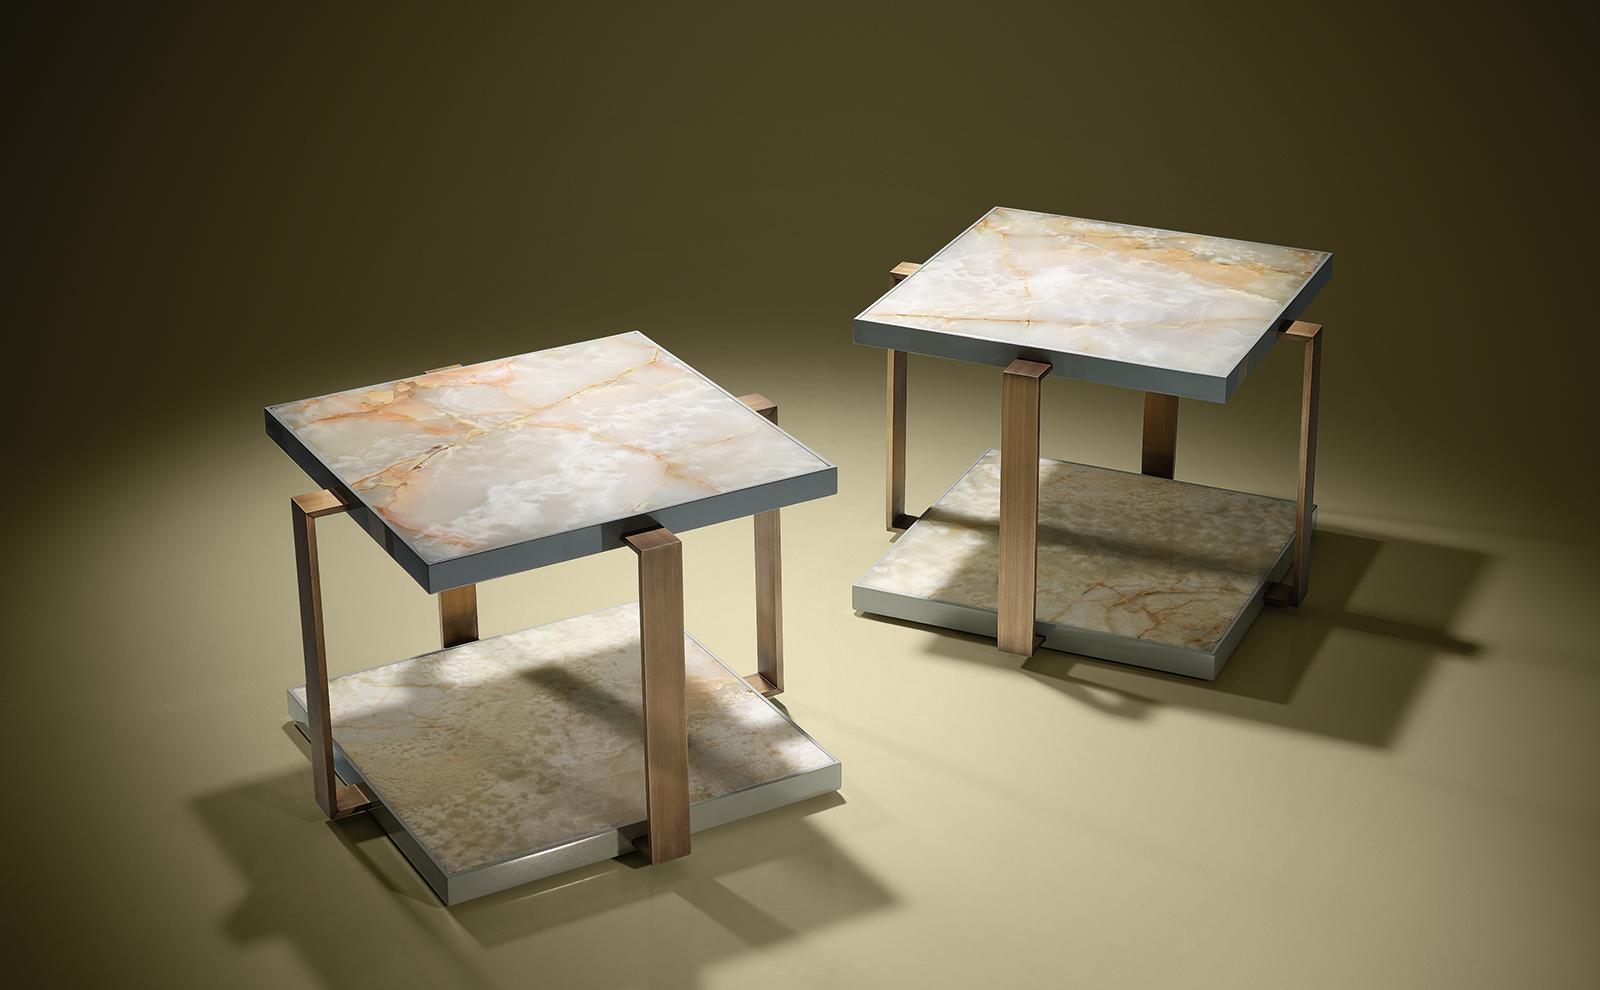 Side table with onyx stone top.
 
Bespoke / Customizable
Identical shapes with different sizes and finishings.
All RAL colors available. (Mate / Half Gloss / Gloss)